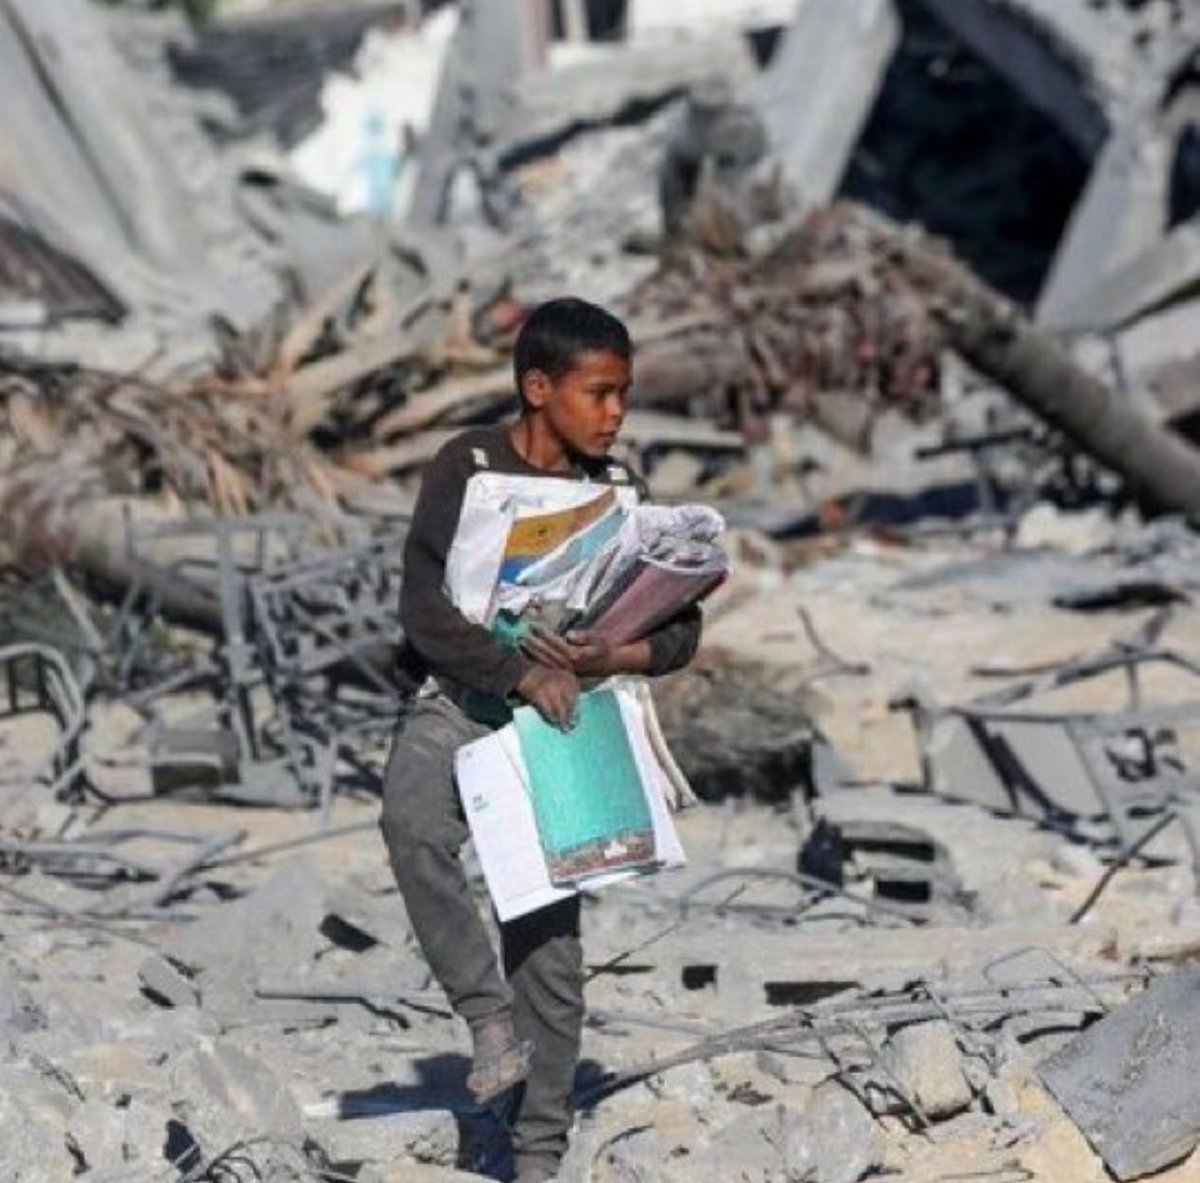 THIS BOY WENT TO SAVE HIS BOOKS AFTER ISRAEL BLEW UP HIS SCHOOL